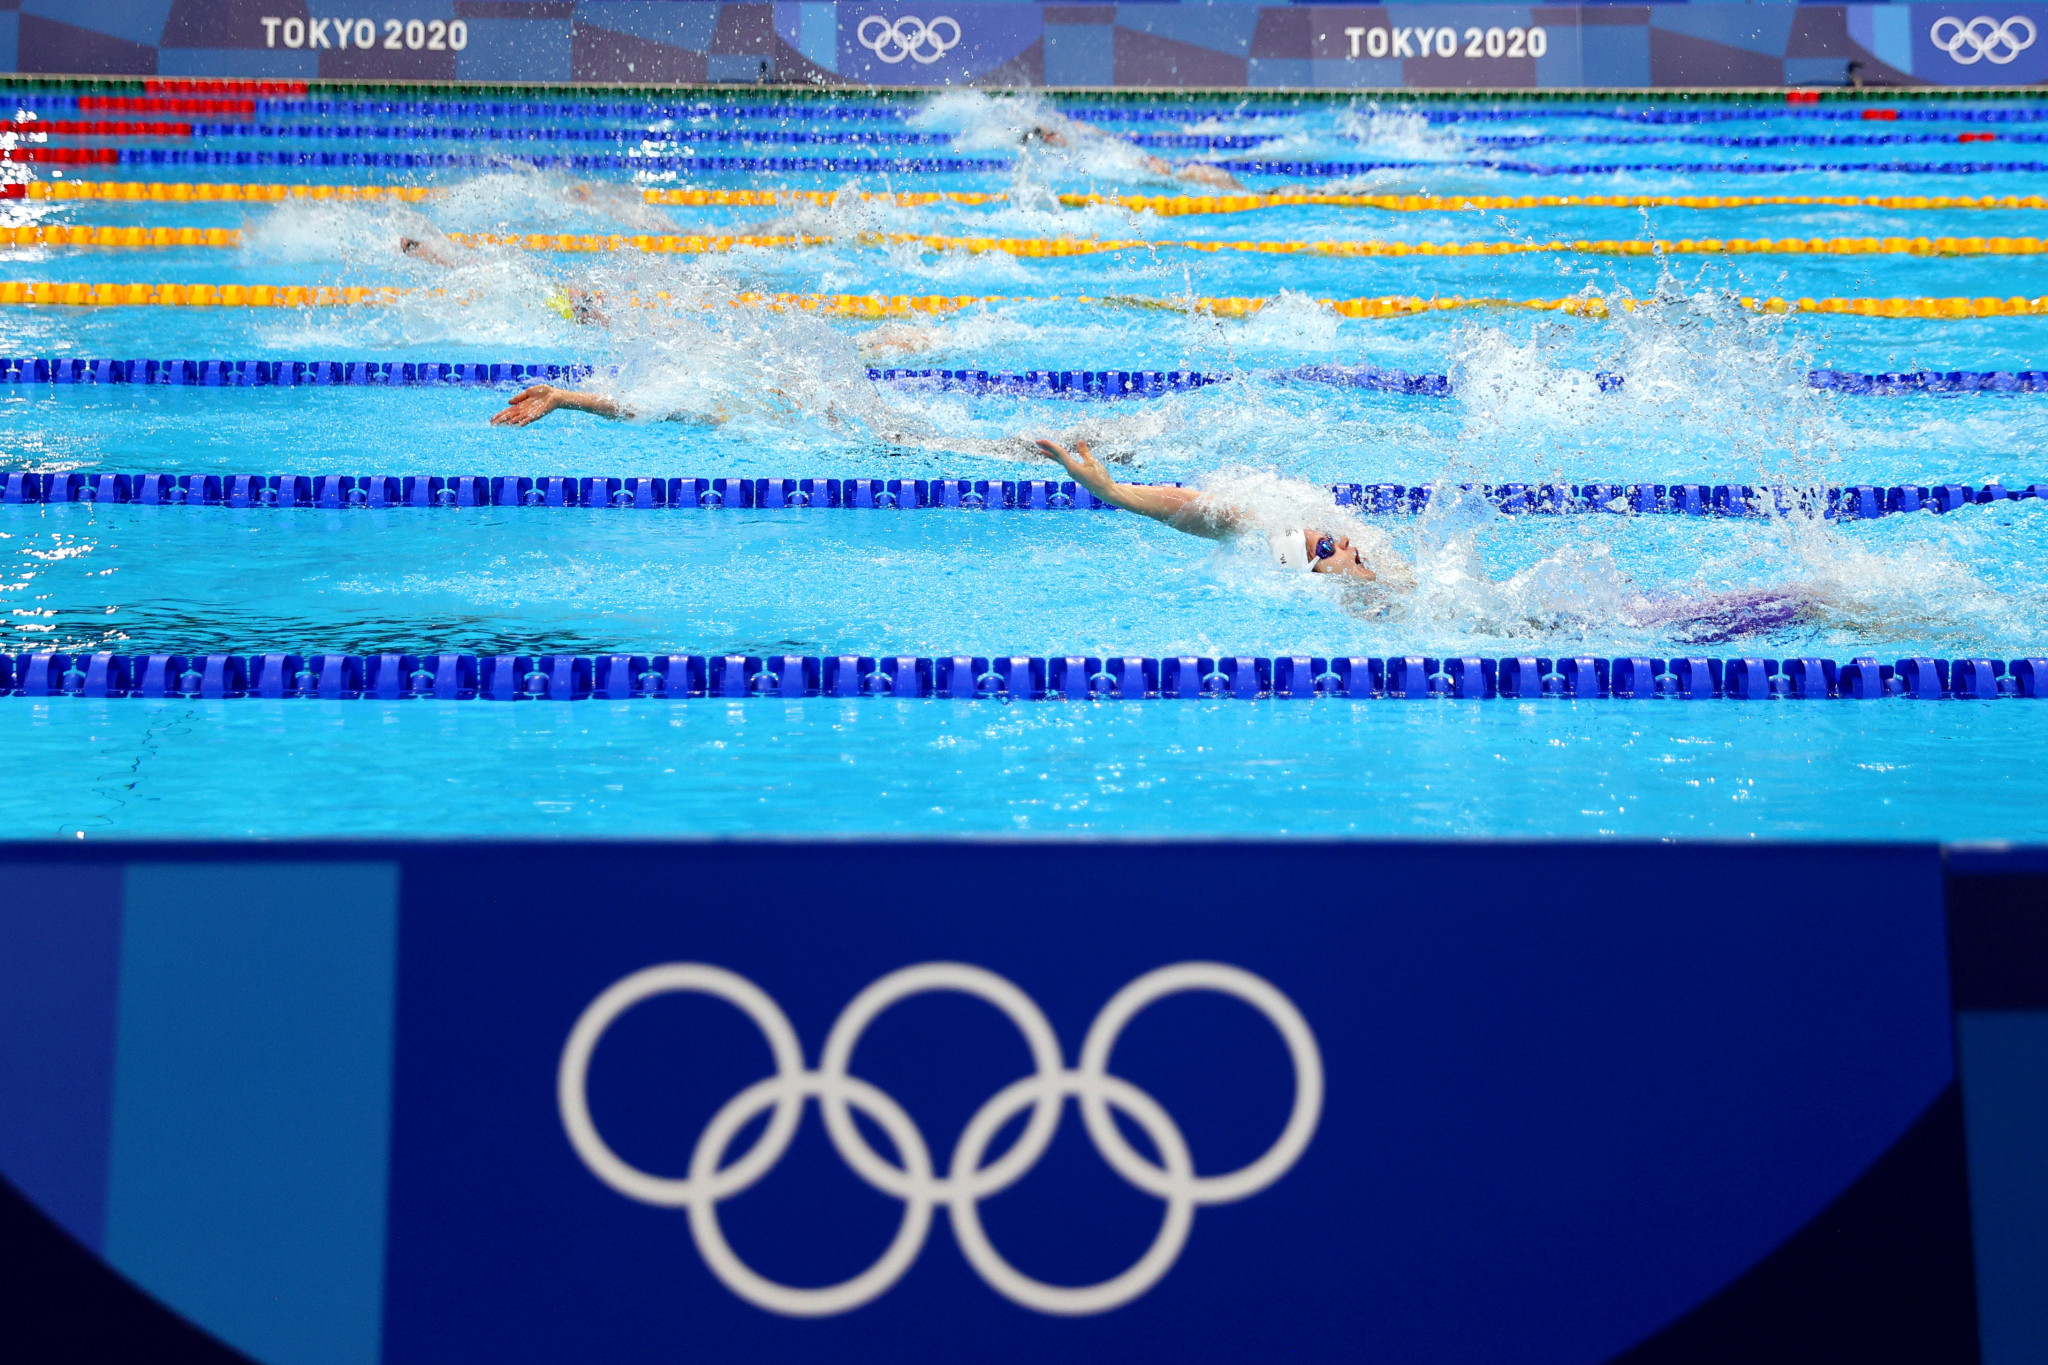 Paris 2024 swimming qualification times published by IOC "outdated", FINA claims